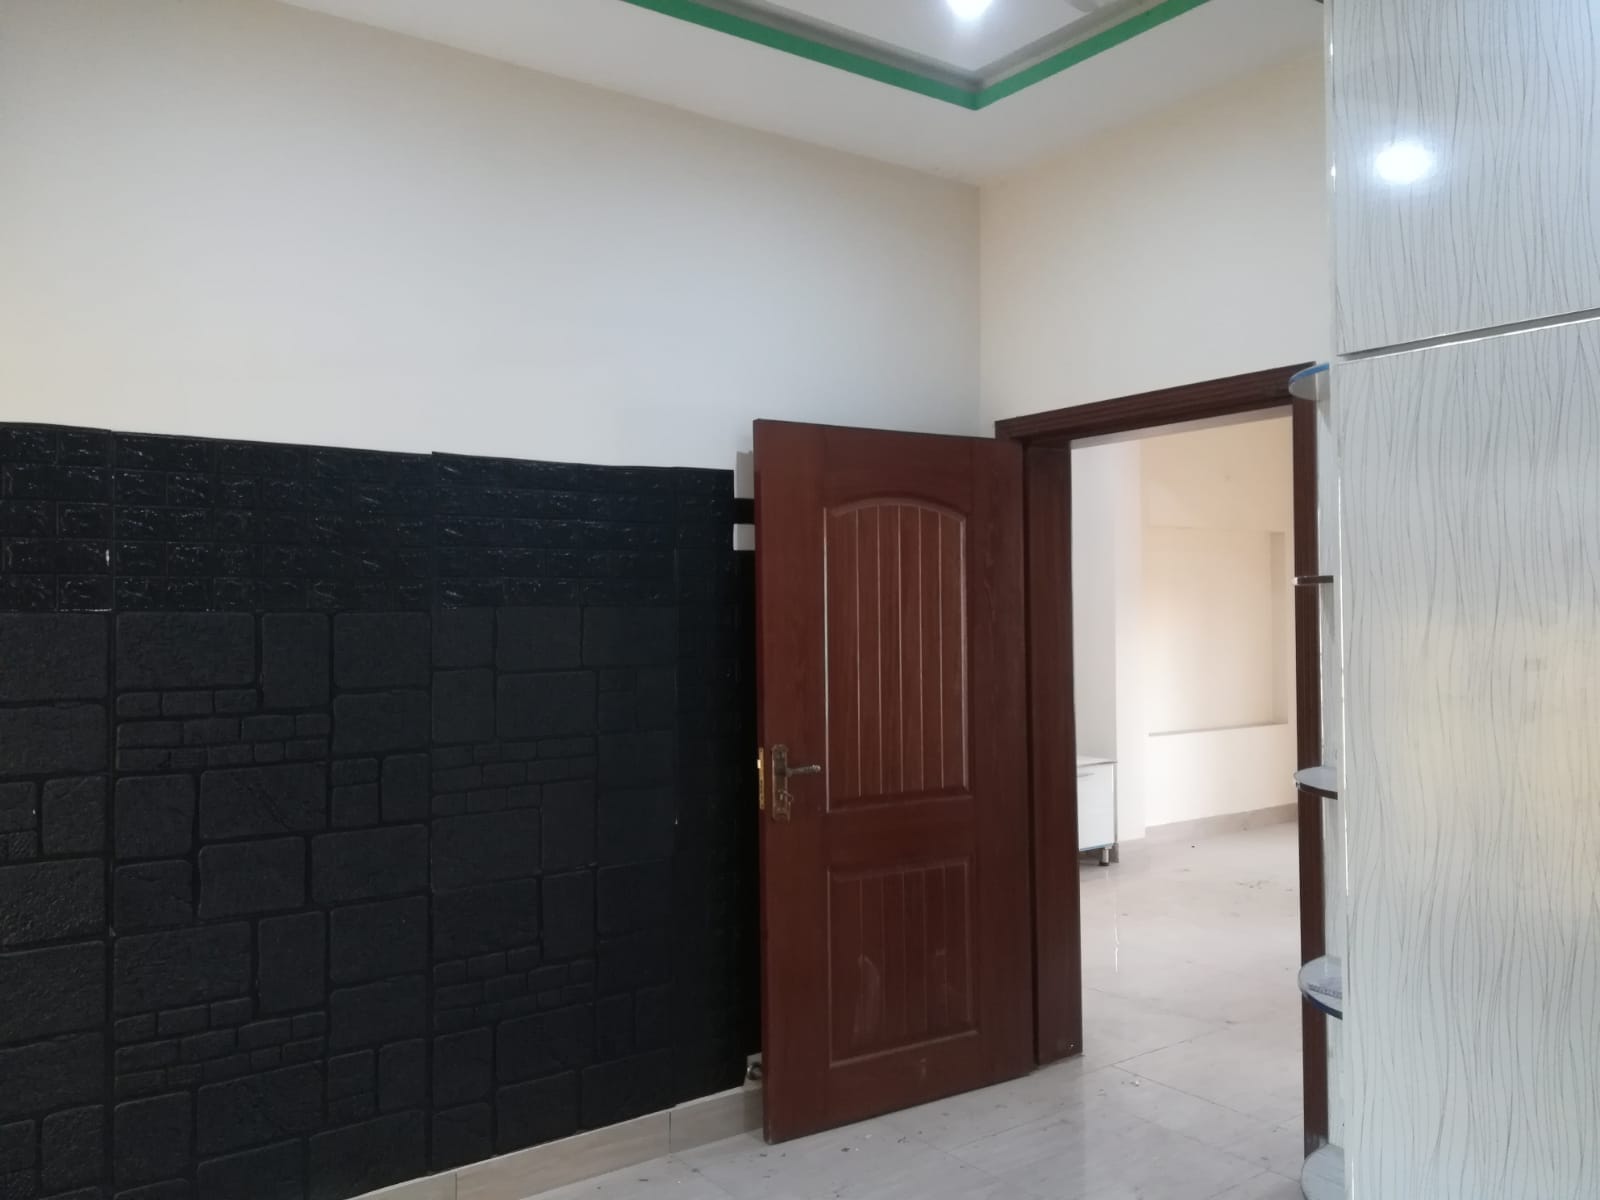 3.56 Marla full house available for Rent located in Dream avenue society Lahore